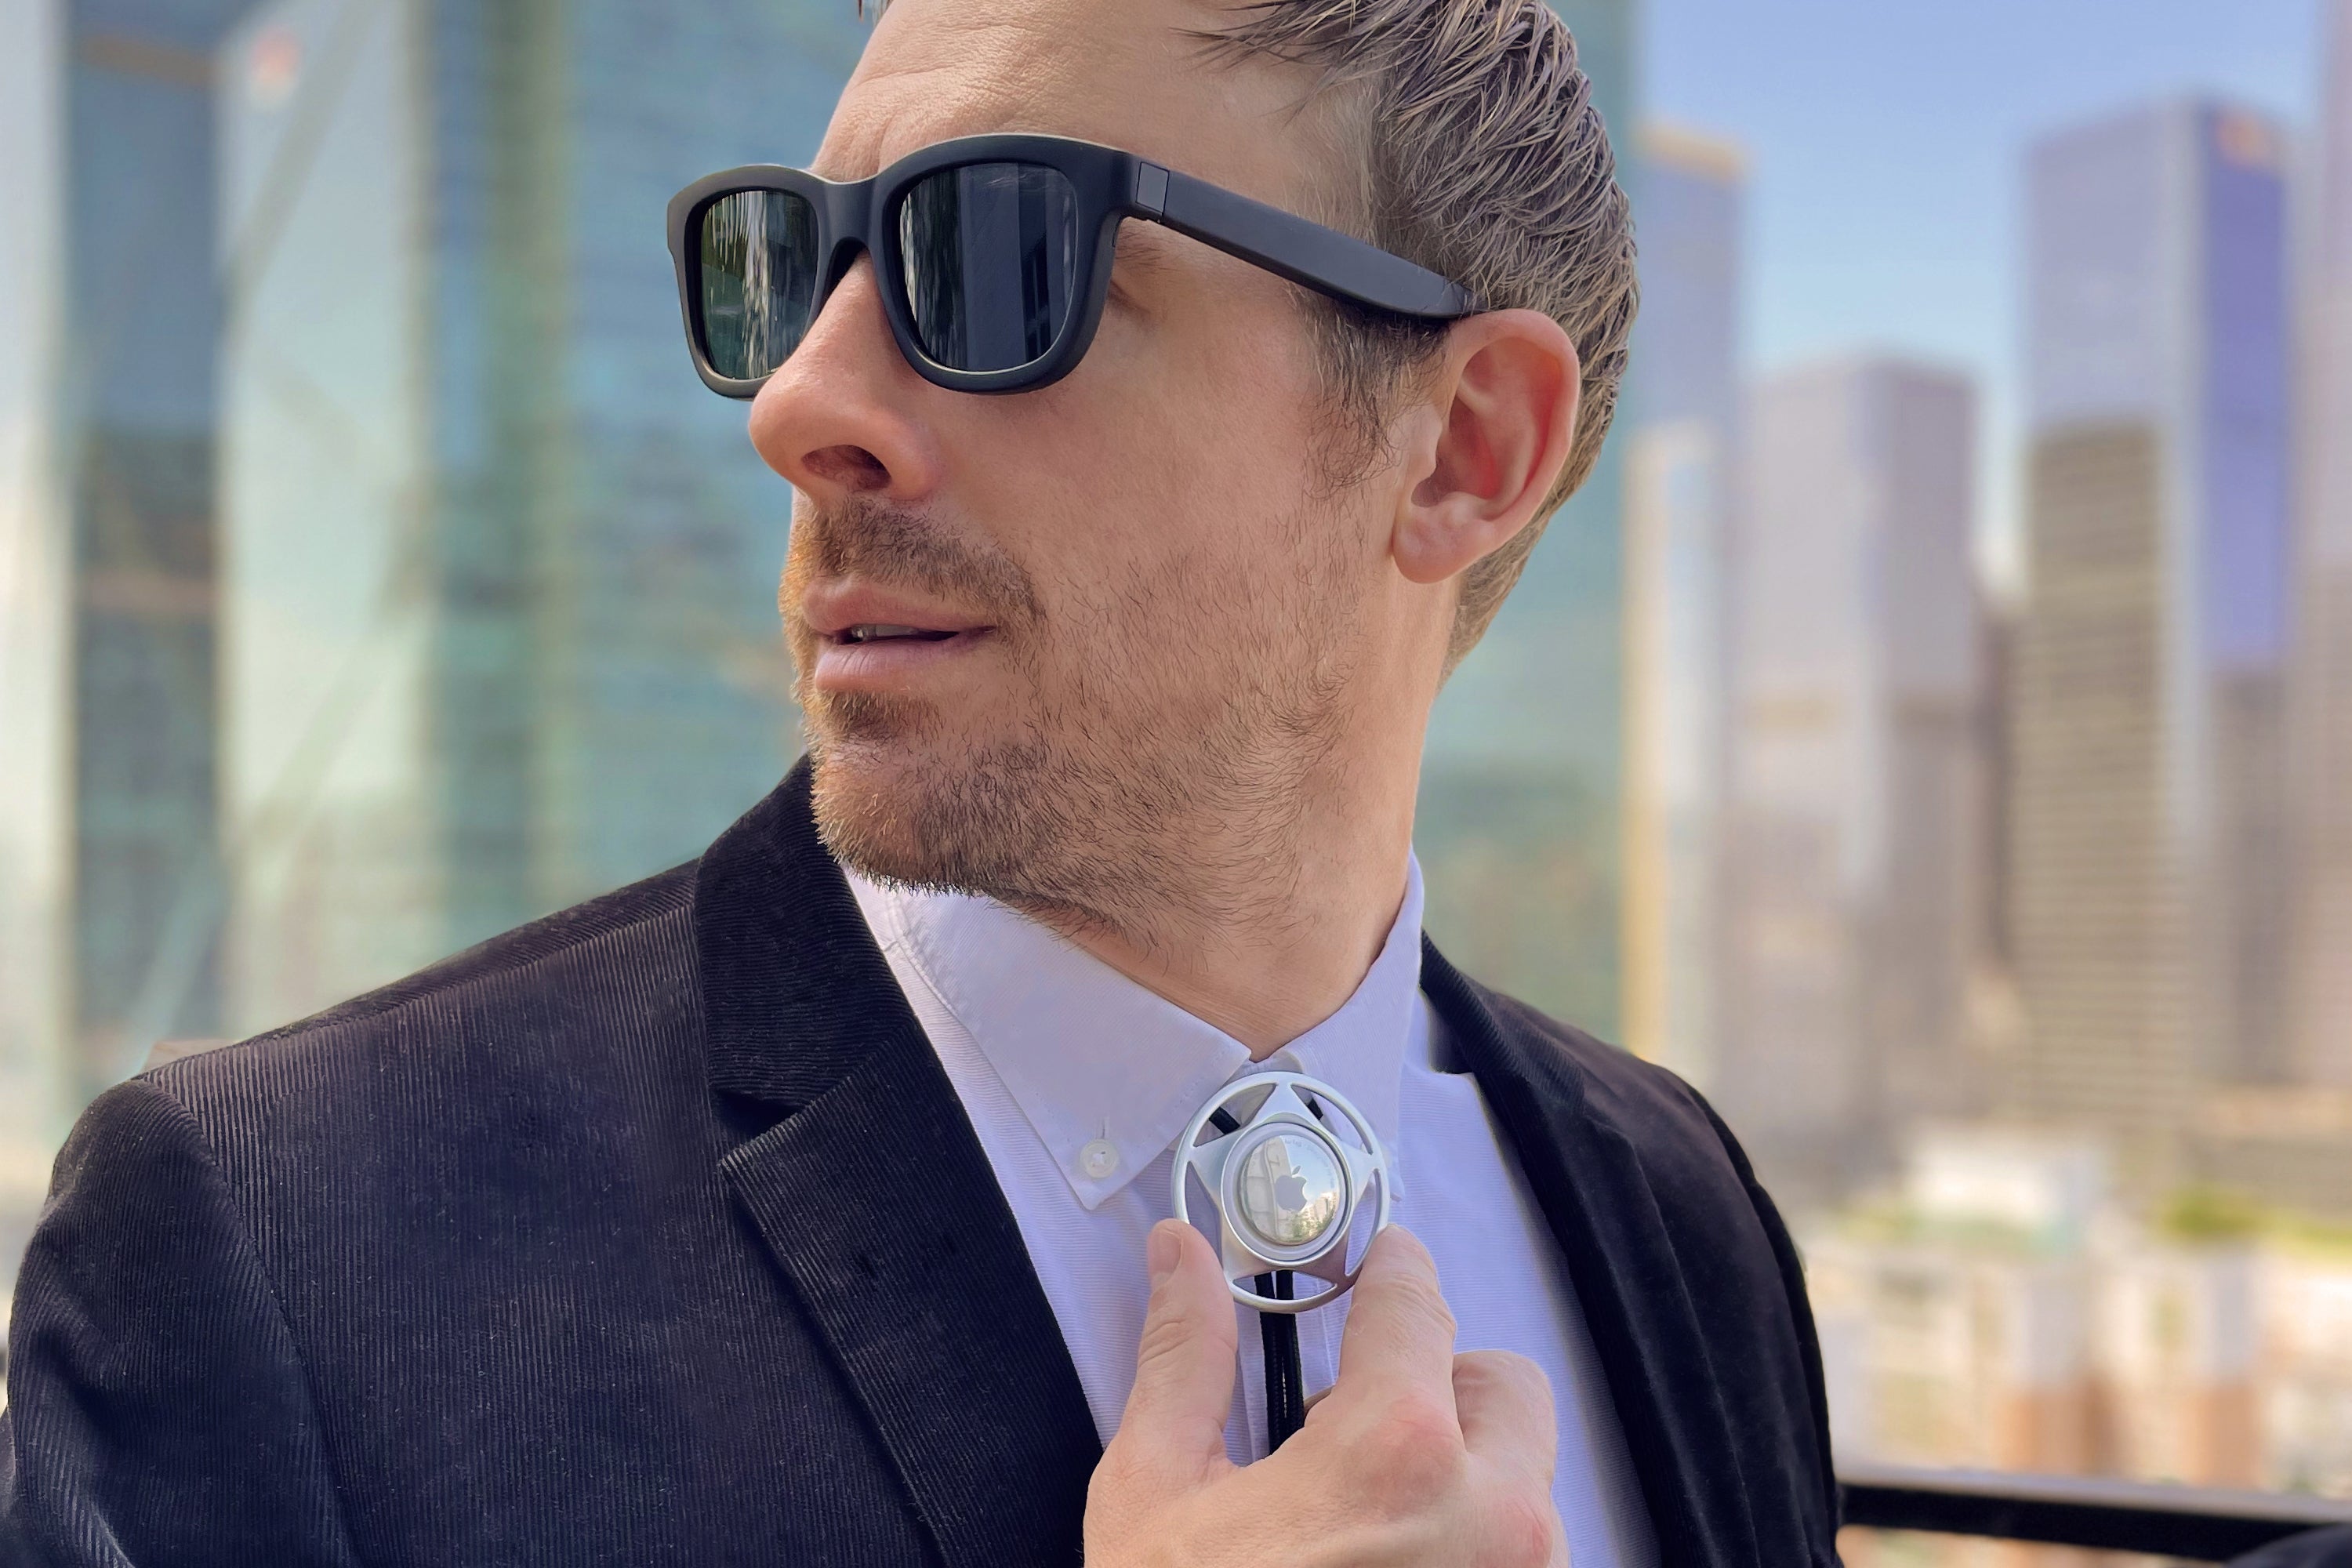 How to Adjust Glasses to Fit | Eyebuydirect